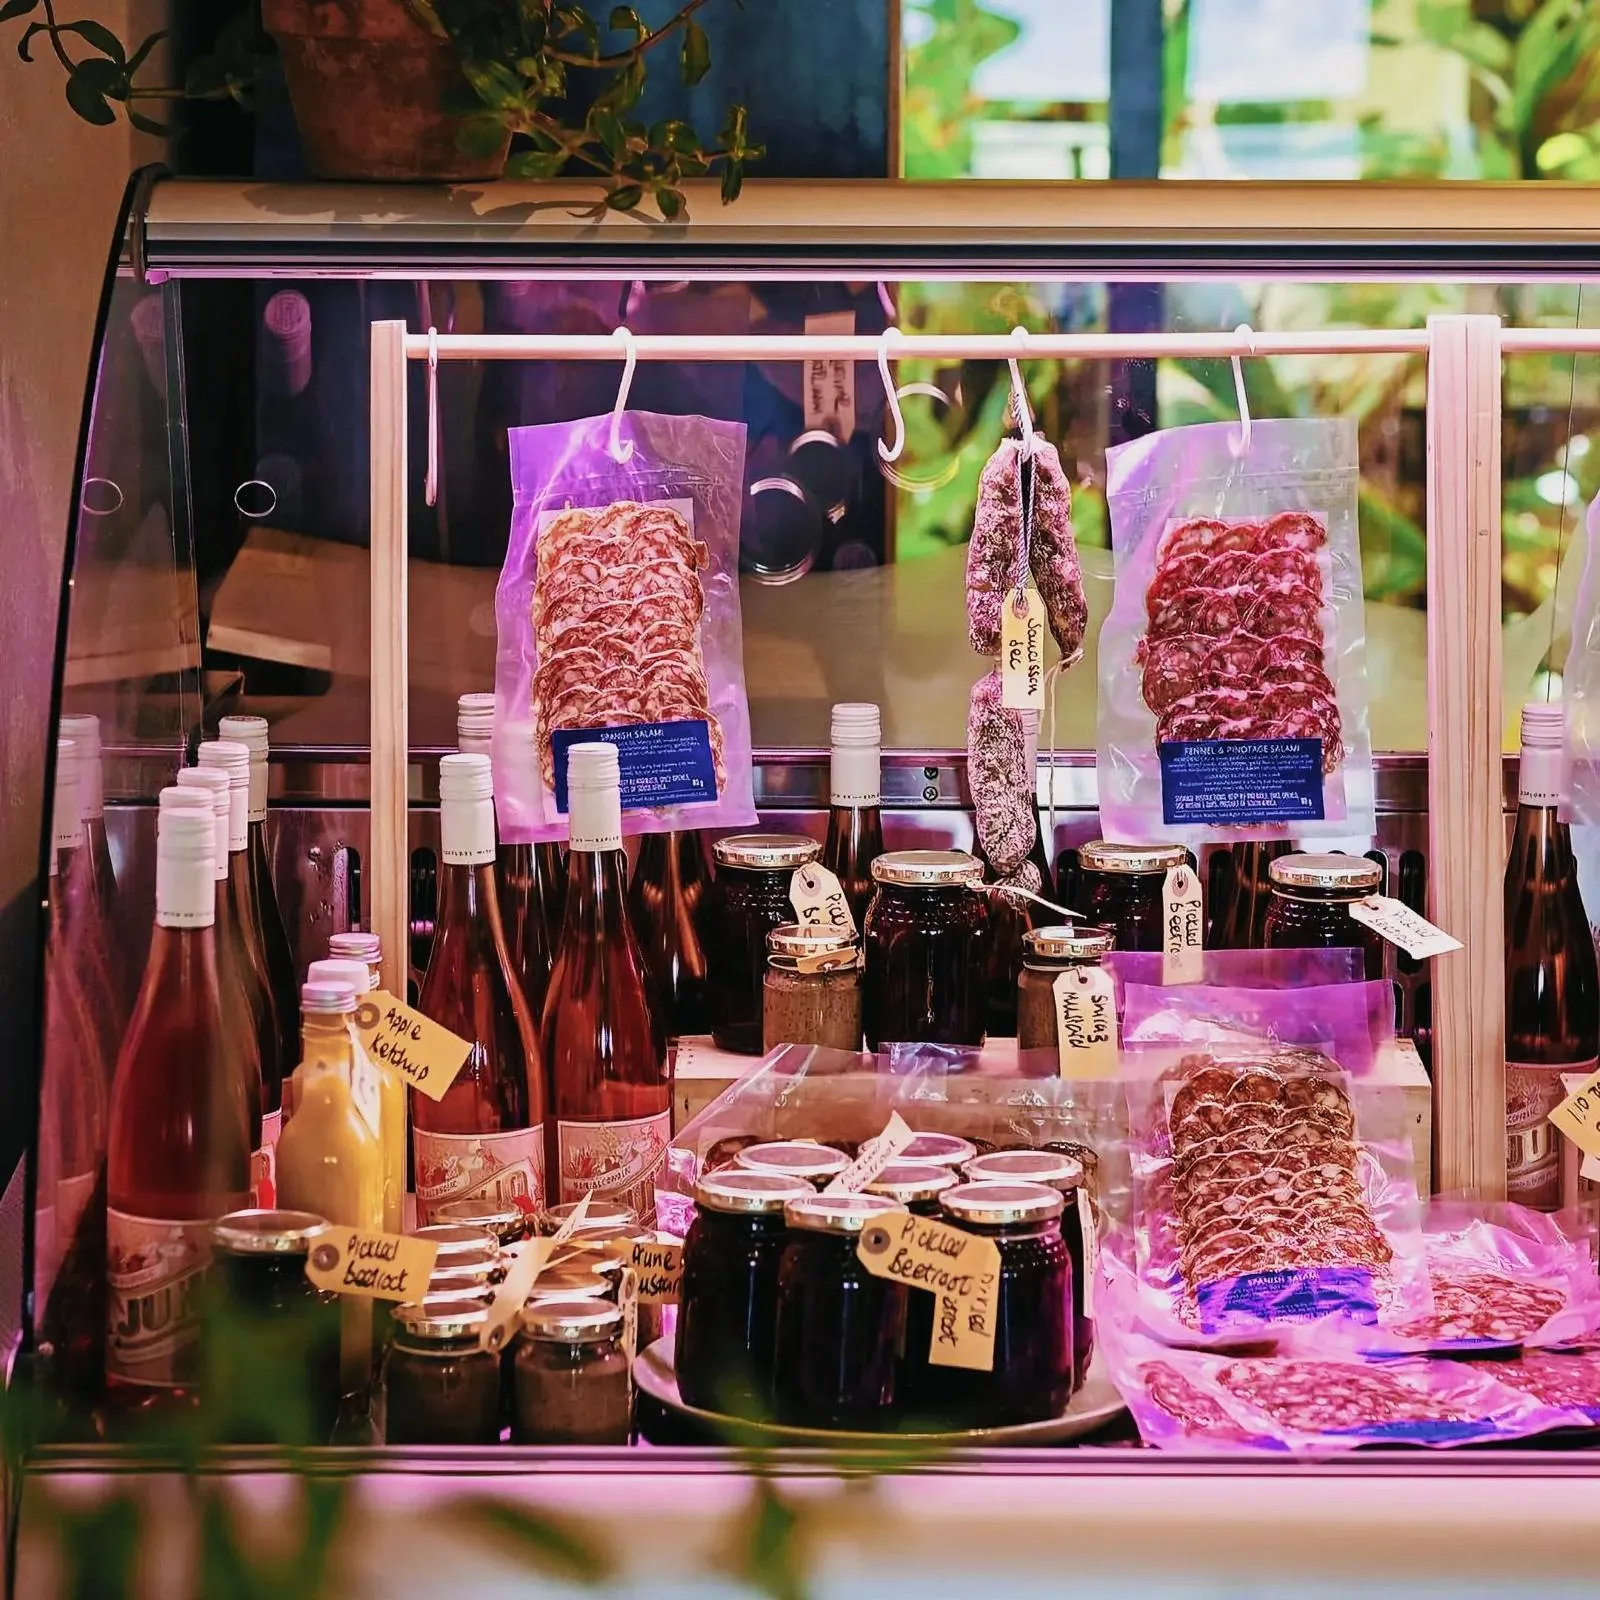 Artisanal charcuterie display at Jewell’s Restaurant in Spice Route Destination